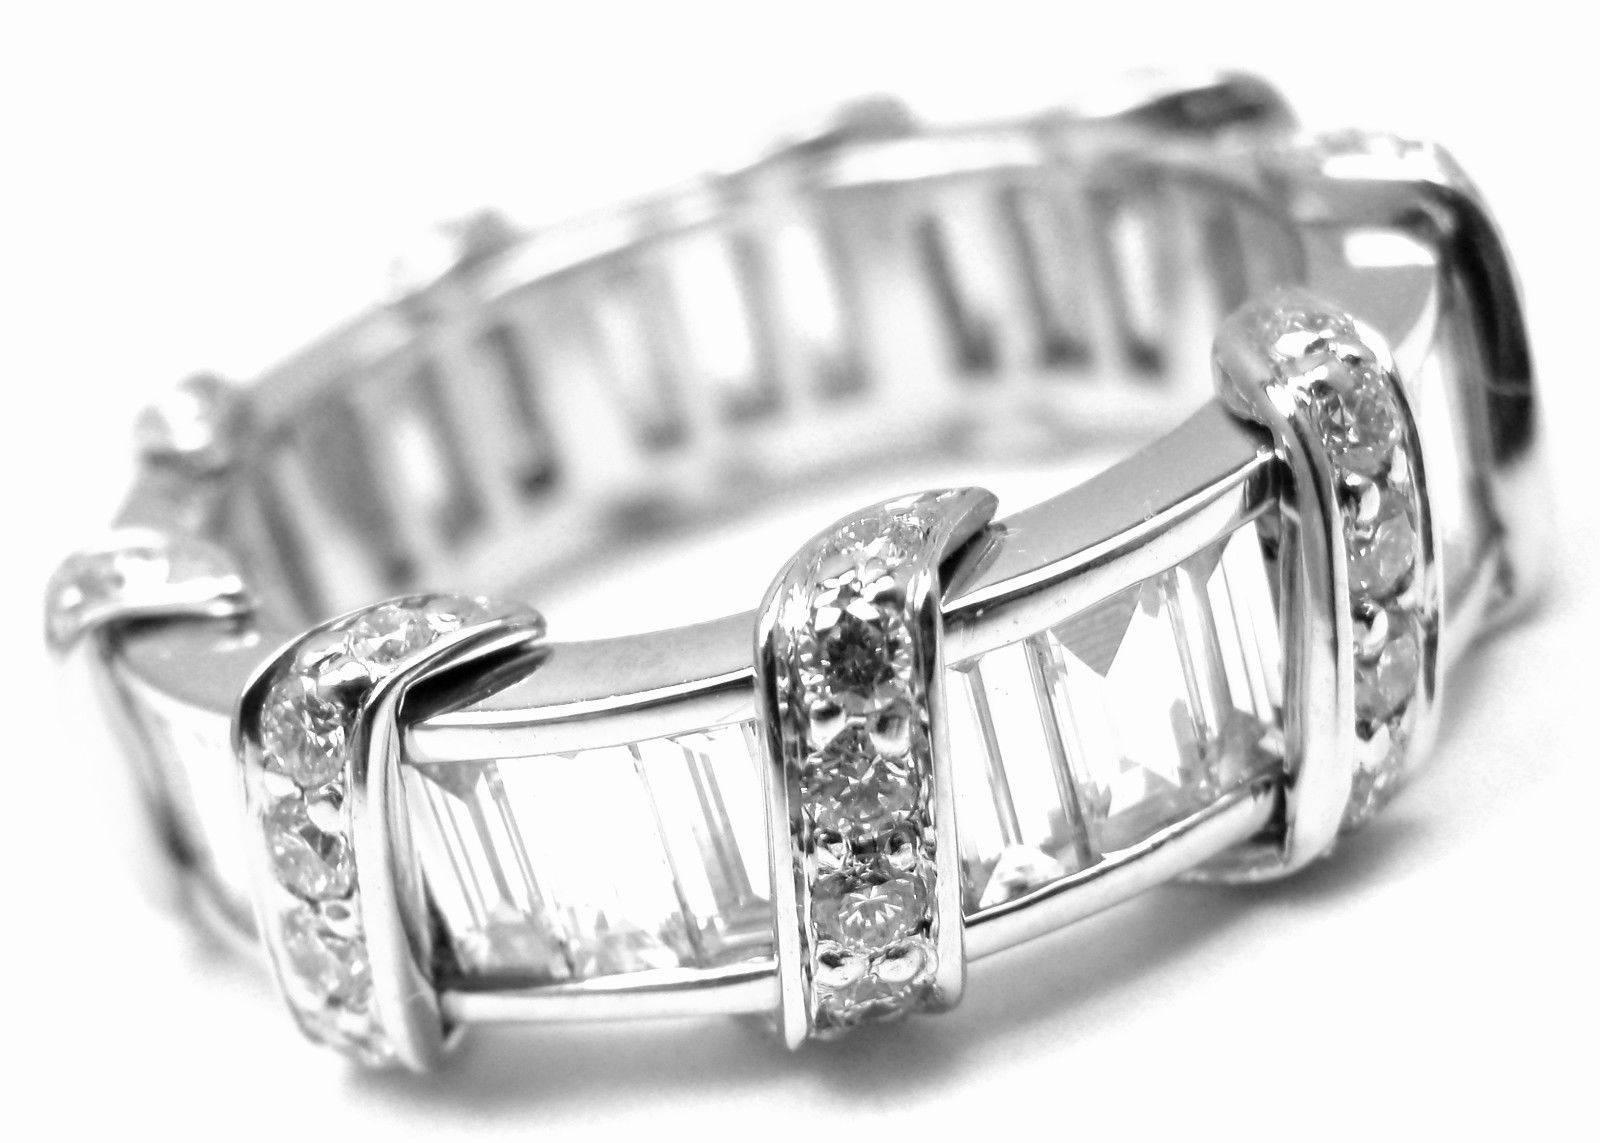 Platinum Diamond Wide Eternity Band Ring by Verdura.  
With 181 round & baguette cut diamonds E color, VVS1 clarity
Details:  
Size: 6.5
Weight: 9.5 grams 
Width: 7mm
Stamped Hallmarks: VERDURA PT.

*Free Shipping within the United States* 